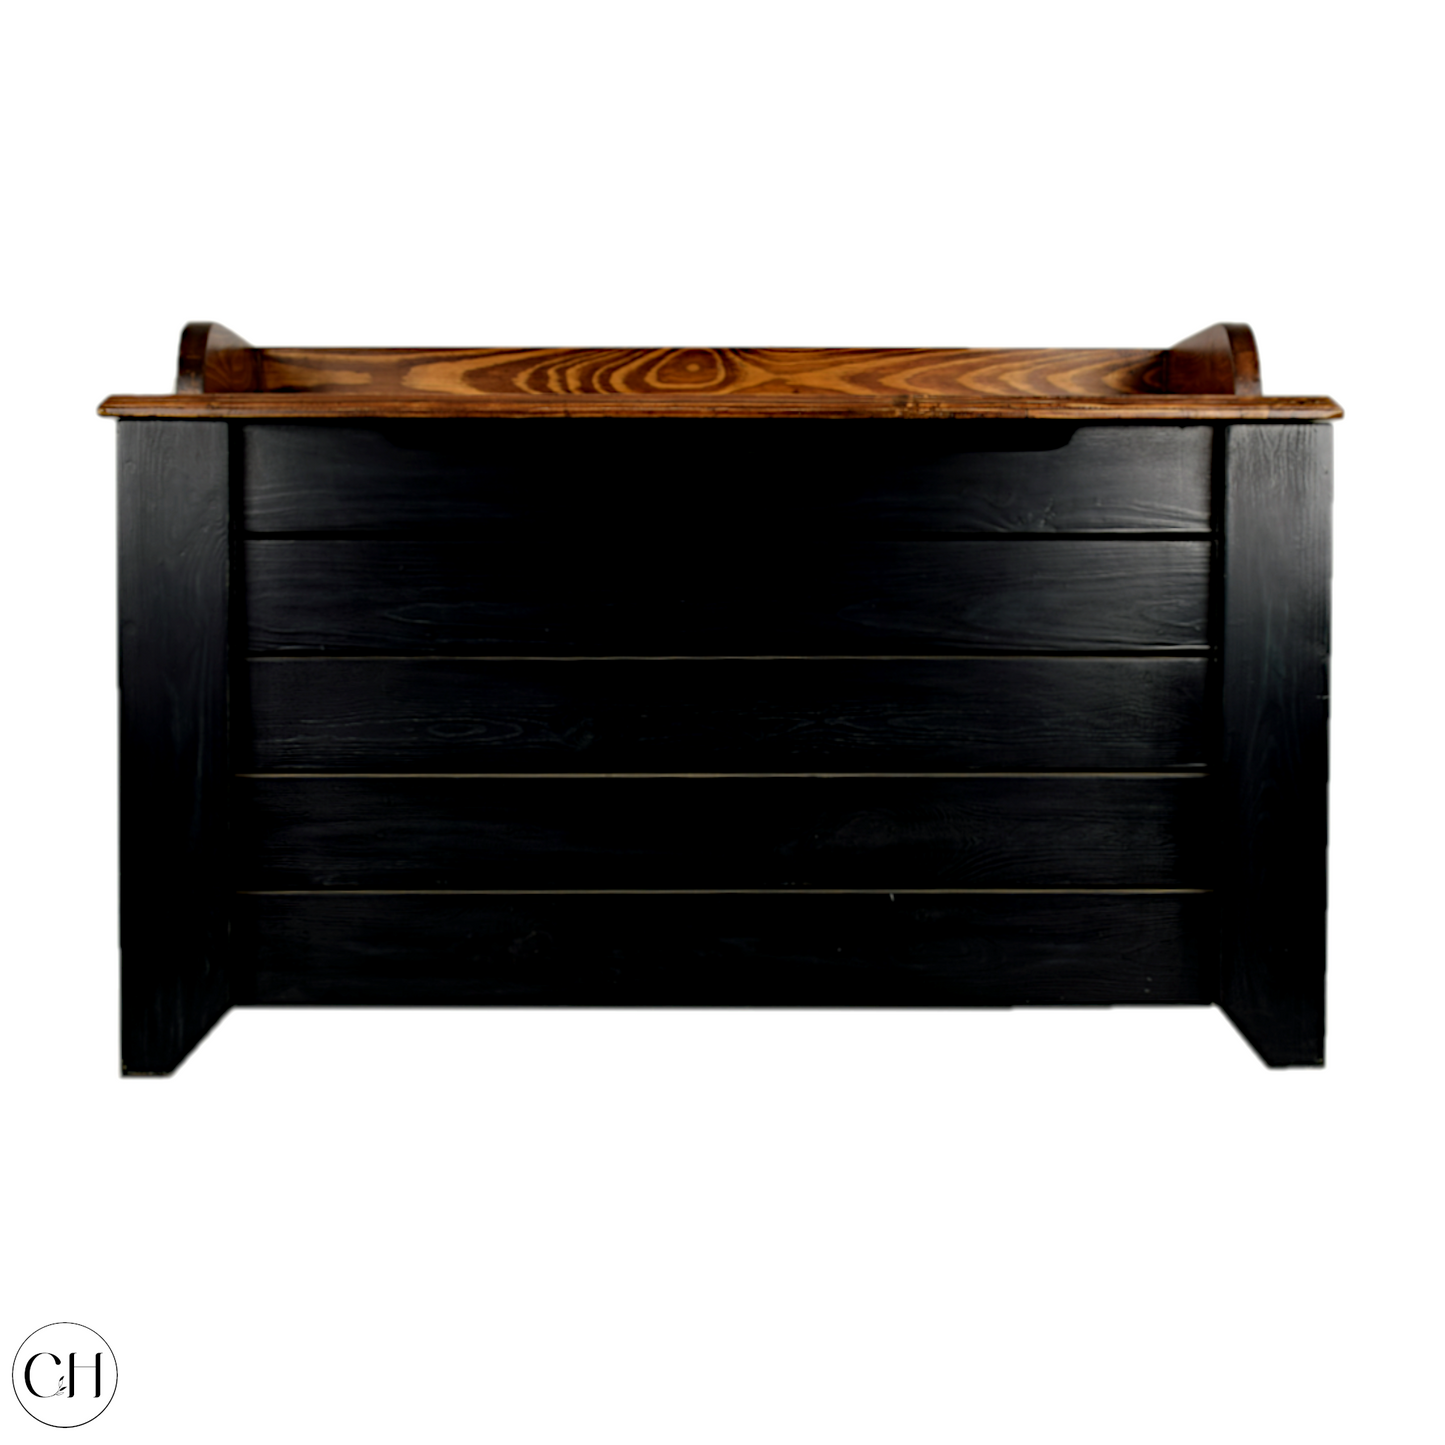 CustHum - Coucal - Large wooden storage box with thin backrest on the opening flap (black and wood color, closed front view)